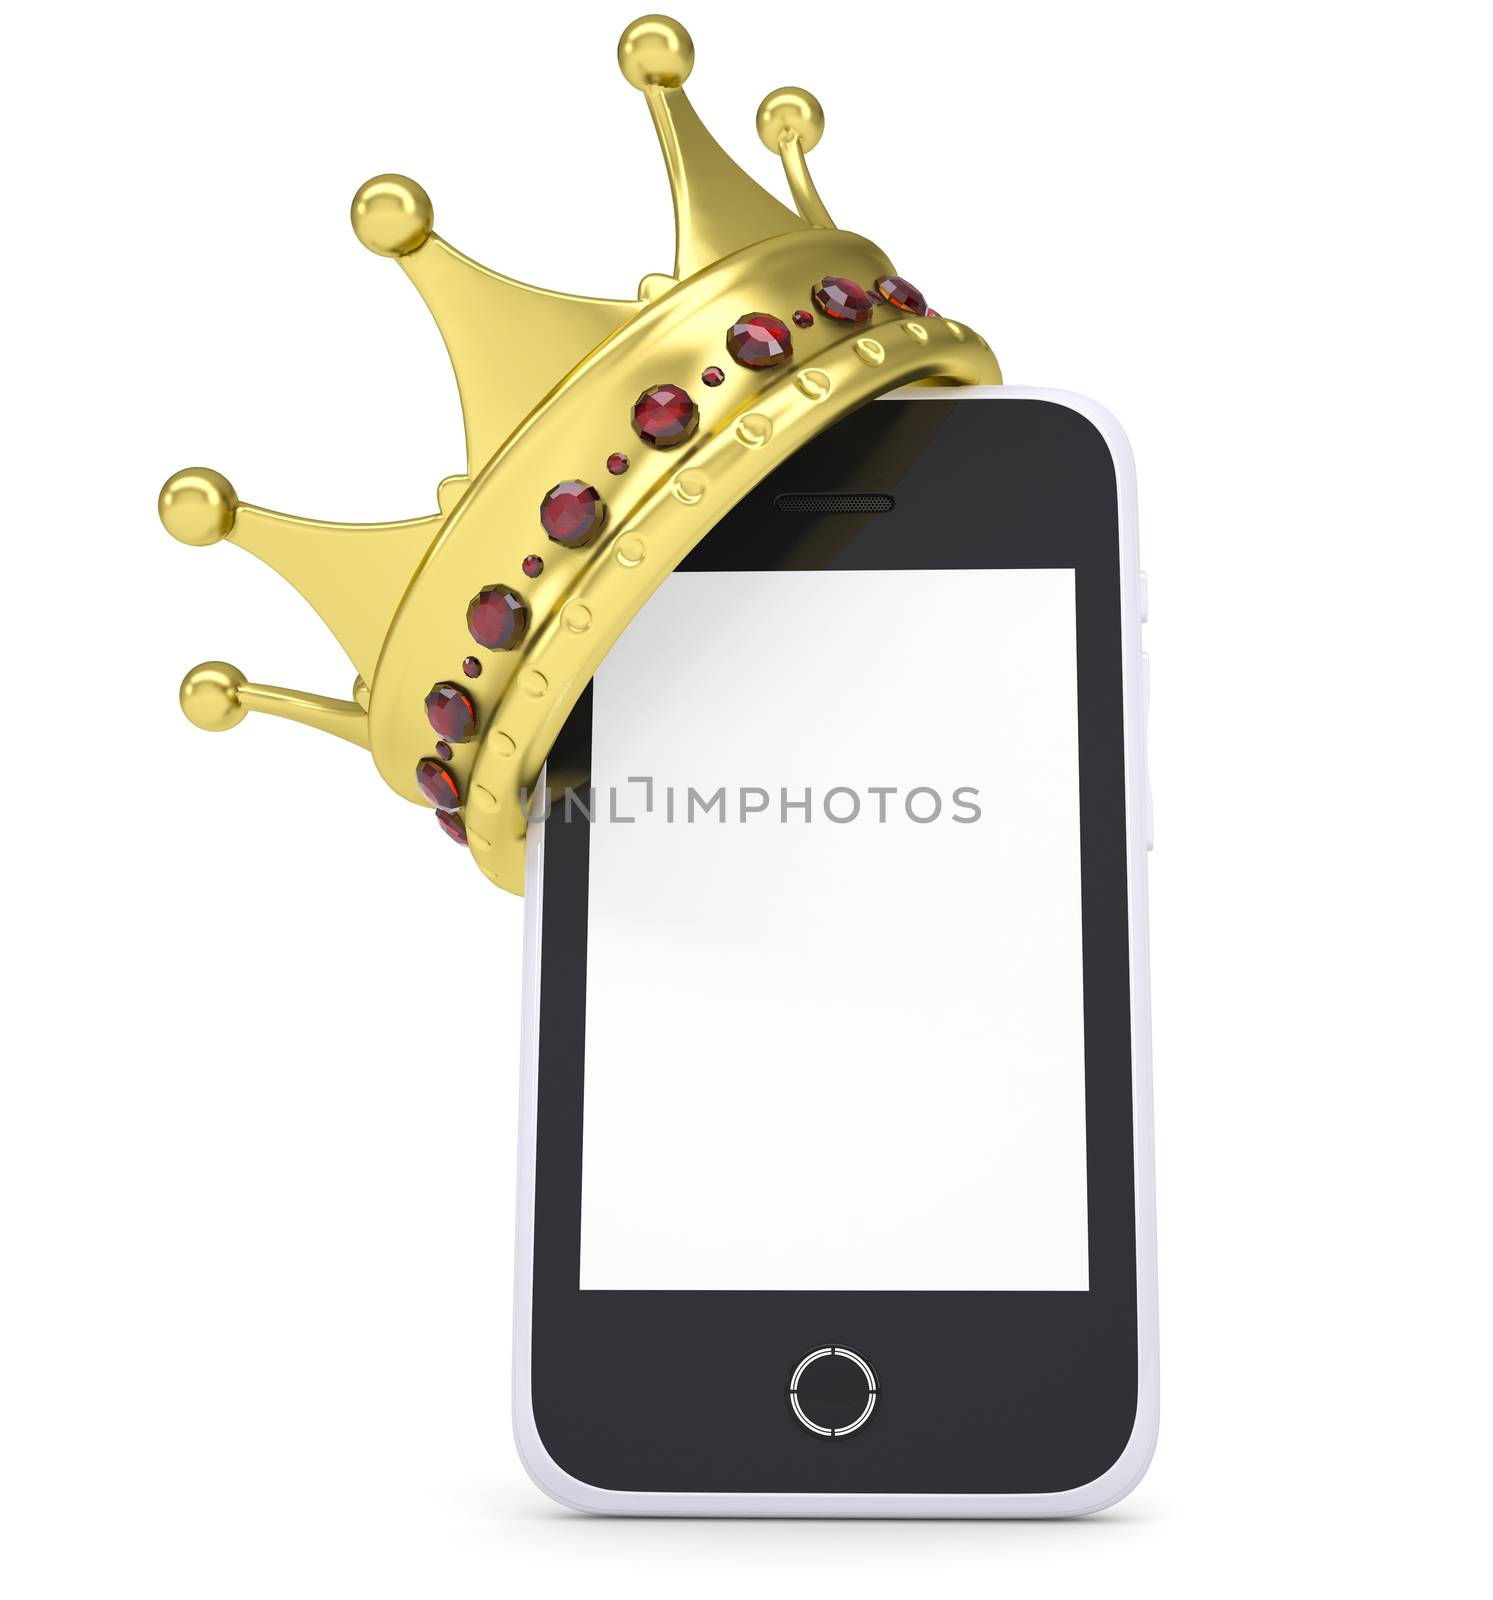 Crown on the smartphone. Isolated render on a white background